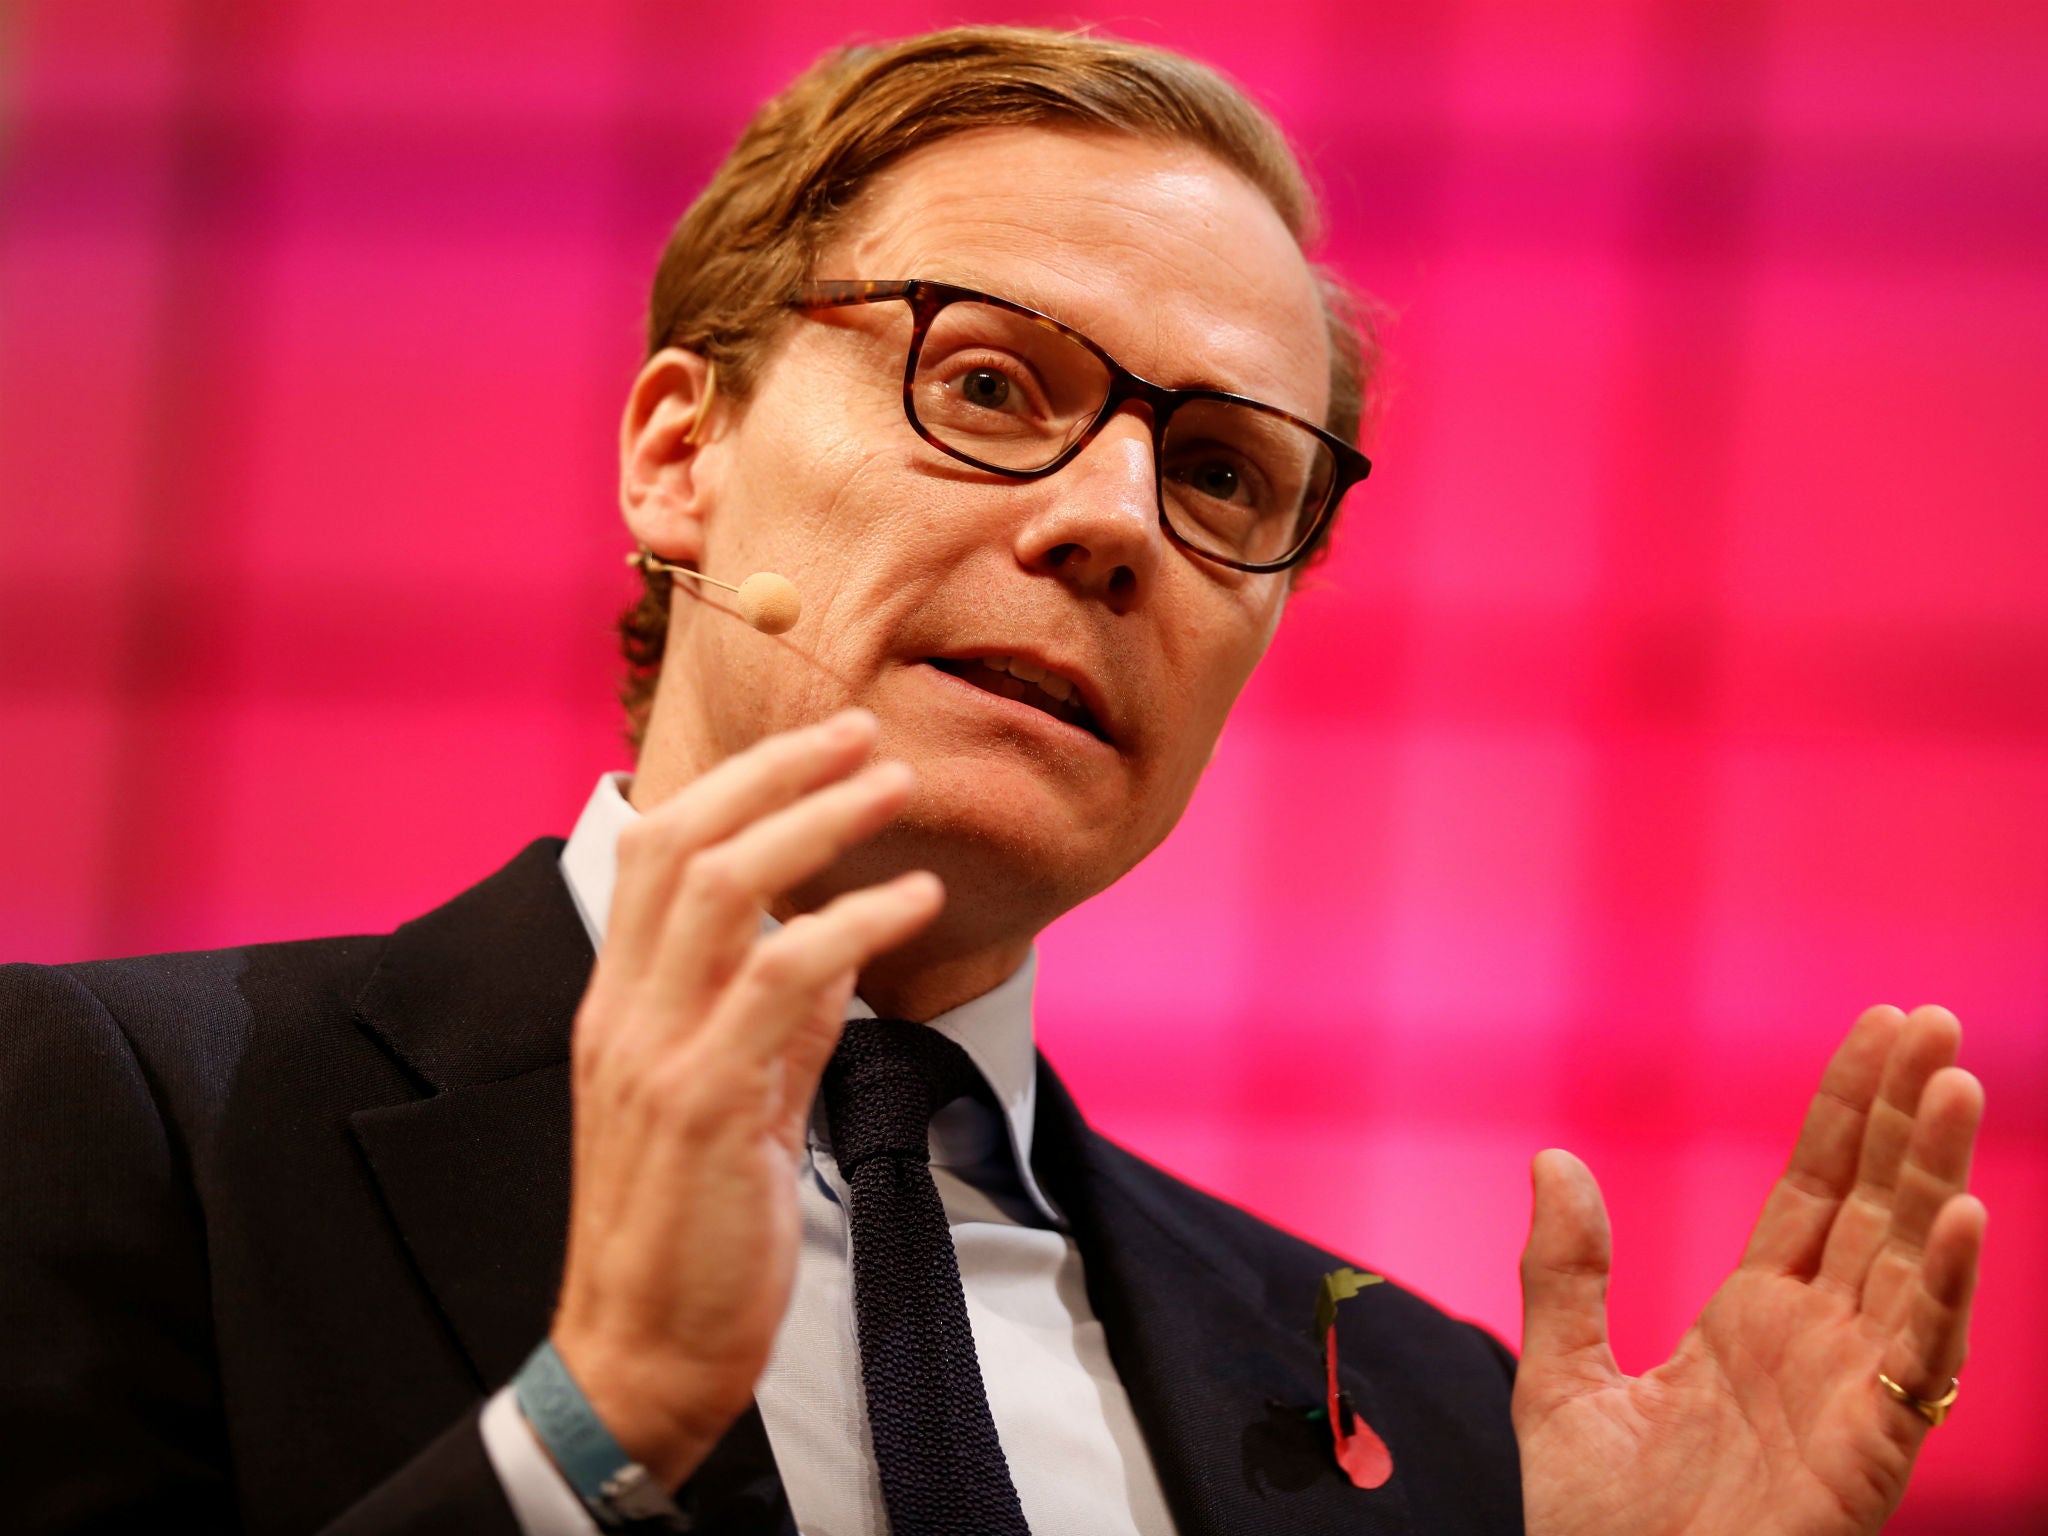 Former Cambridge Analytica CEO Alexander Nix speaks during the Web Summit in Lisbon, Portugal